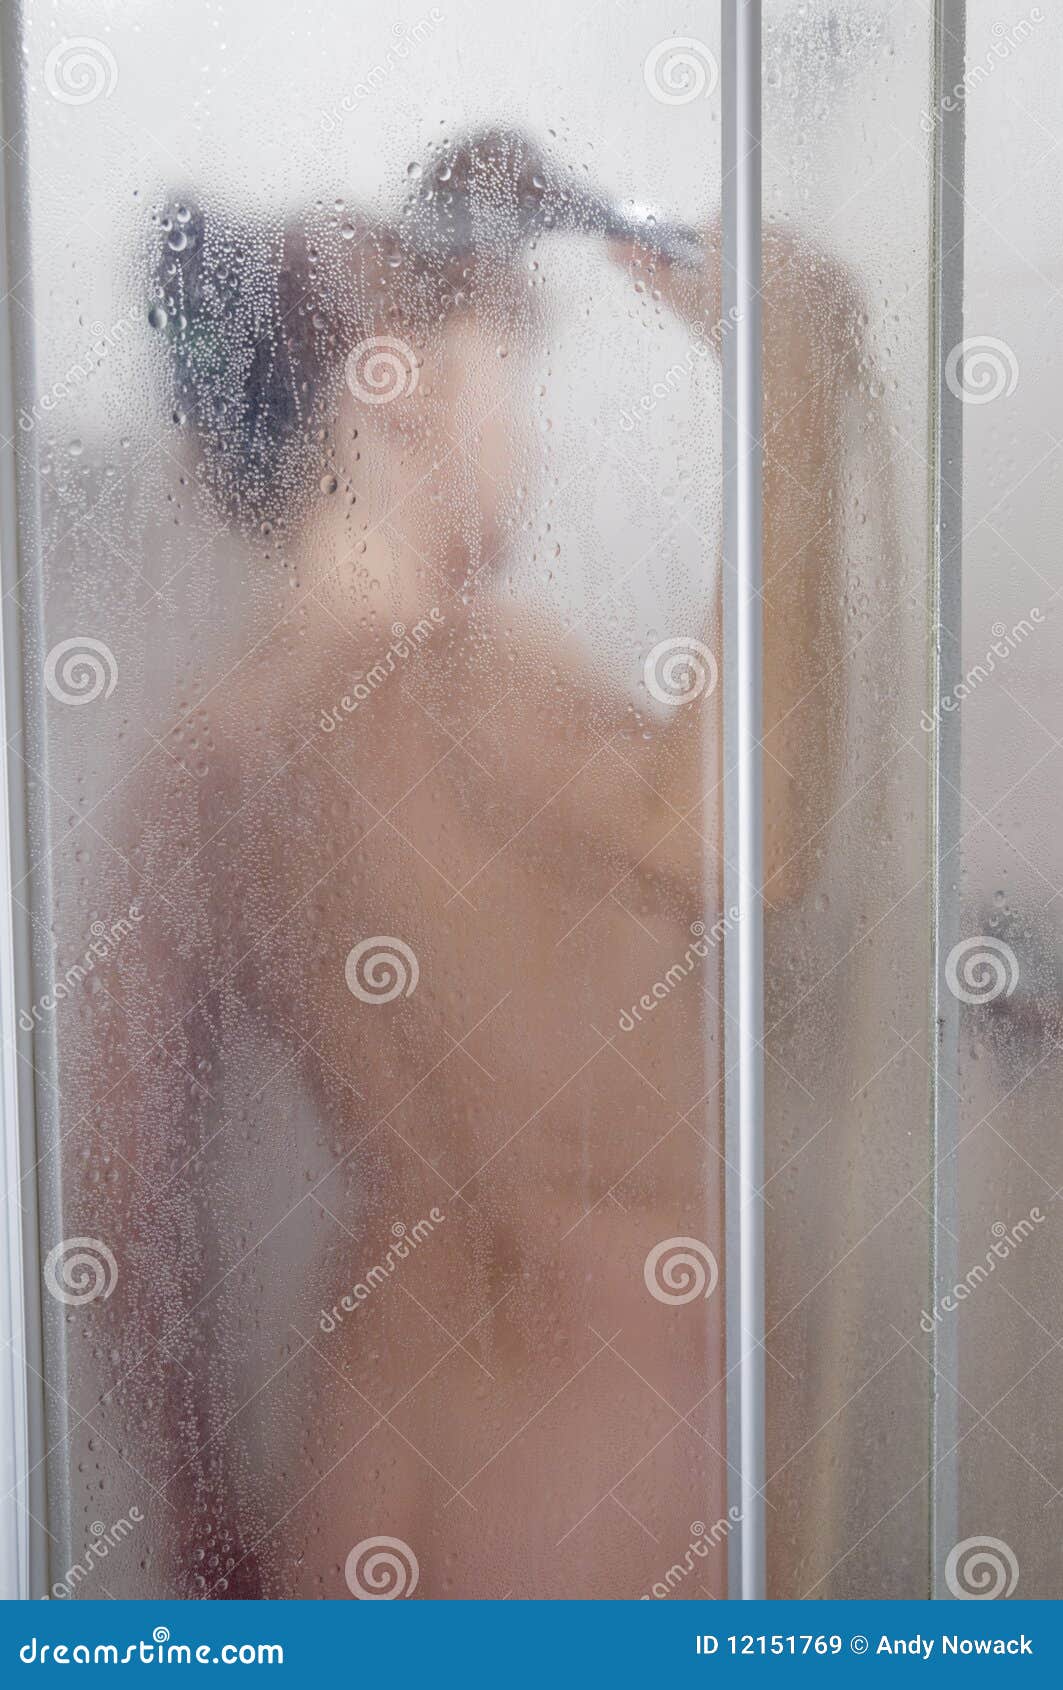 Shower Royalty Free Stock Images Image 12151769